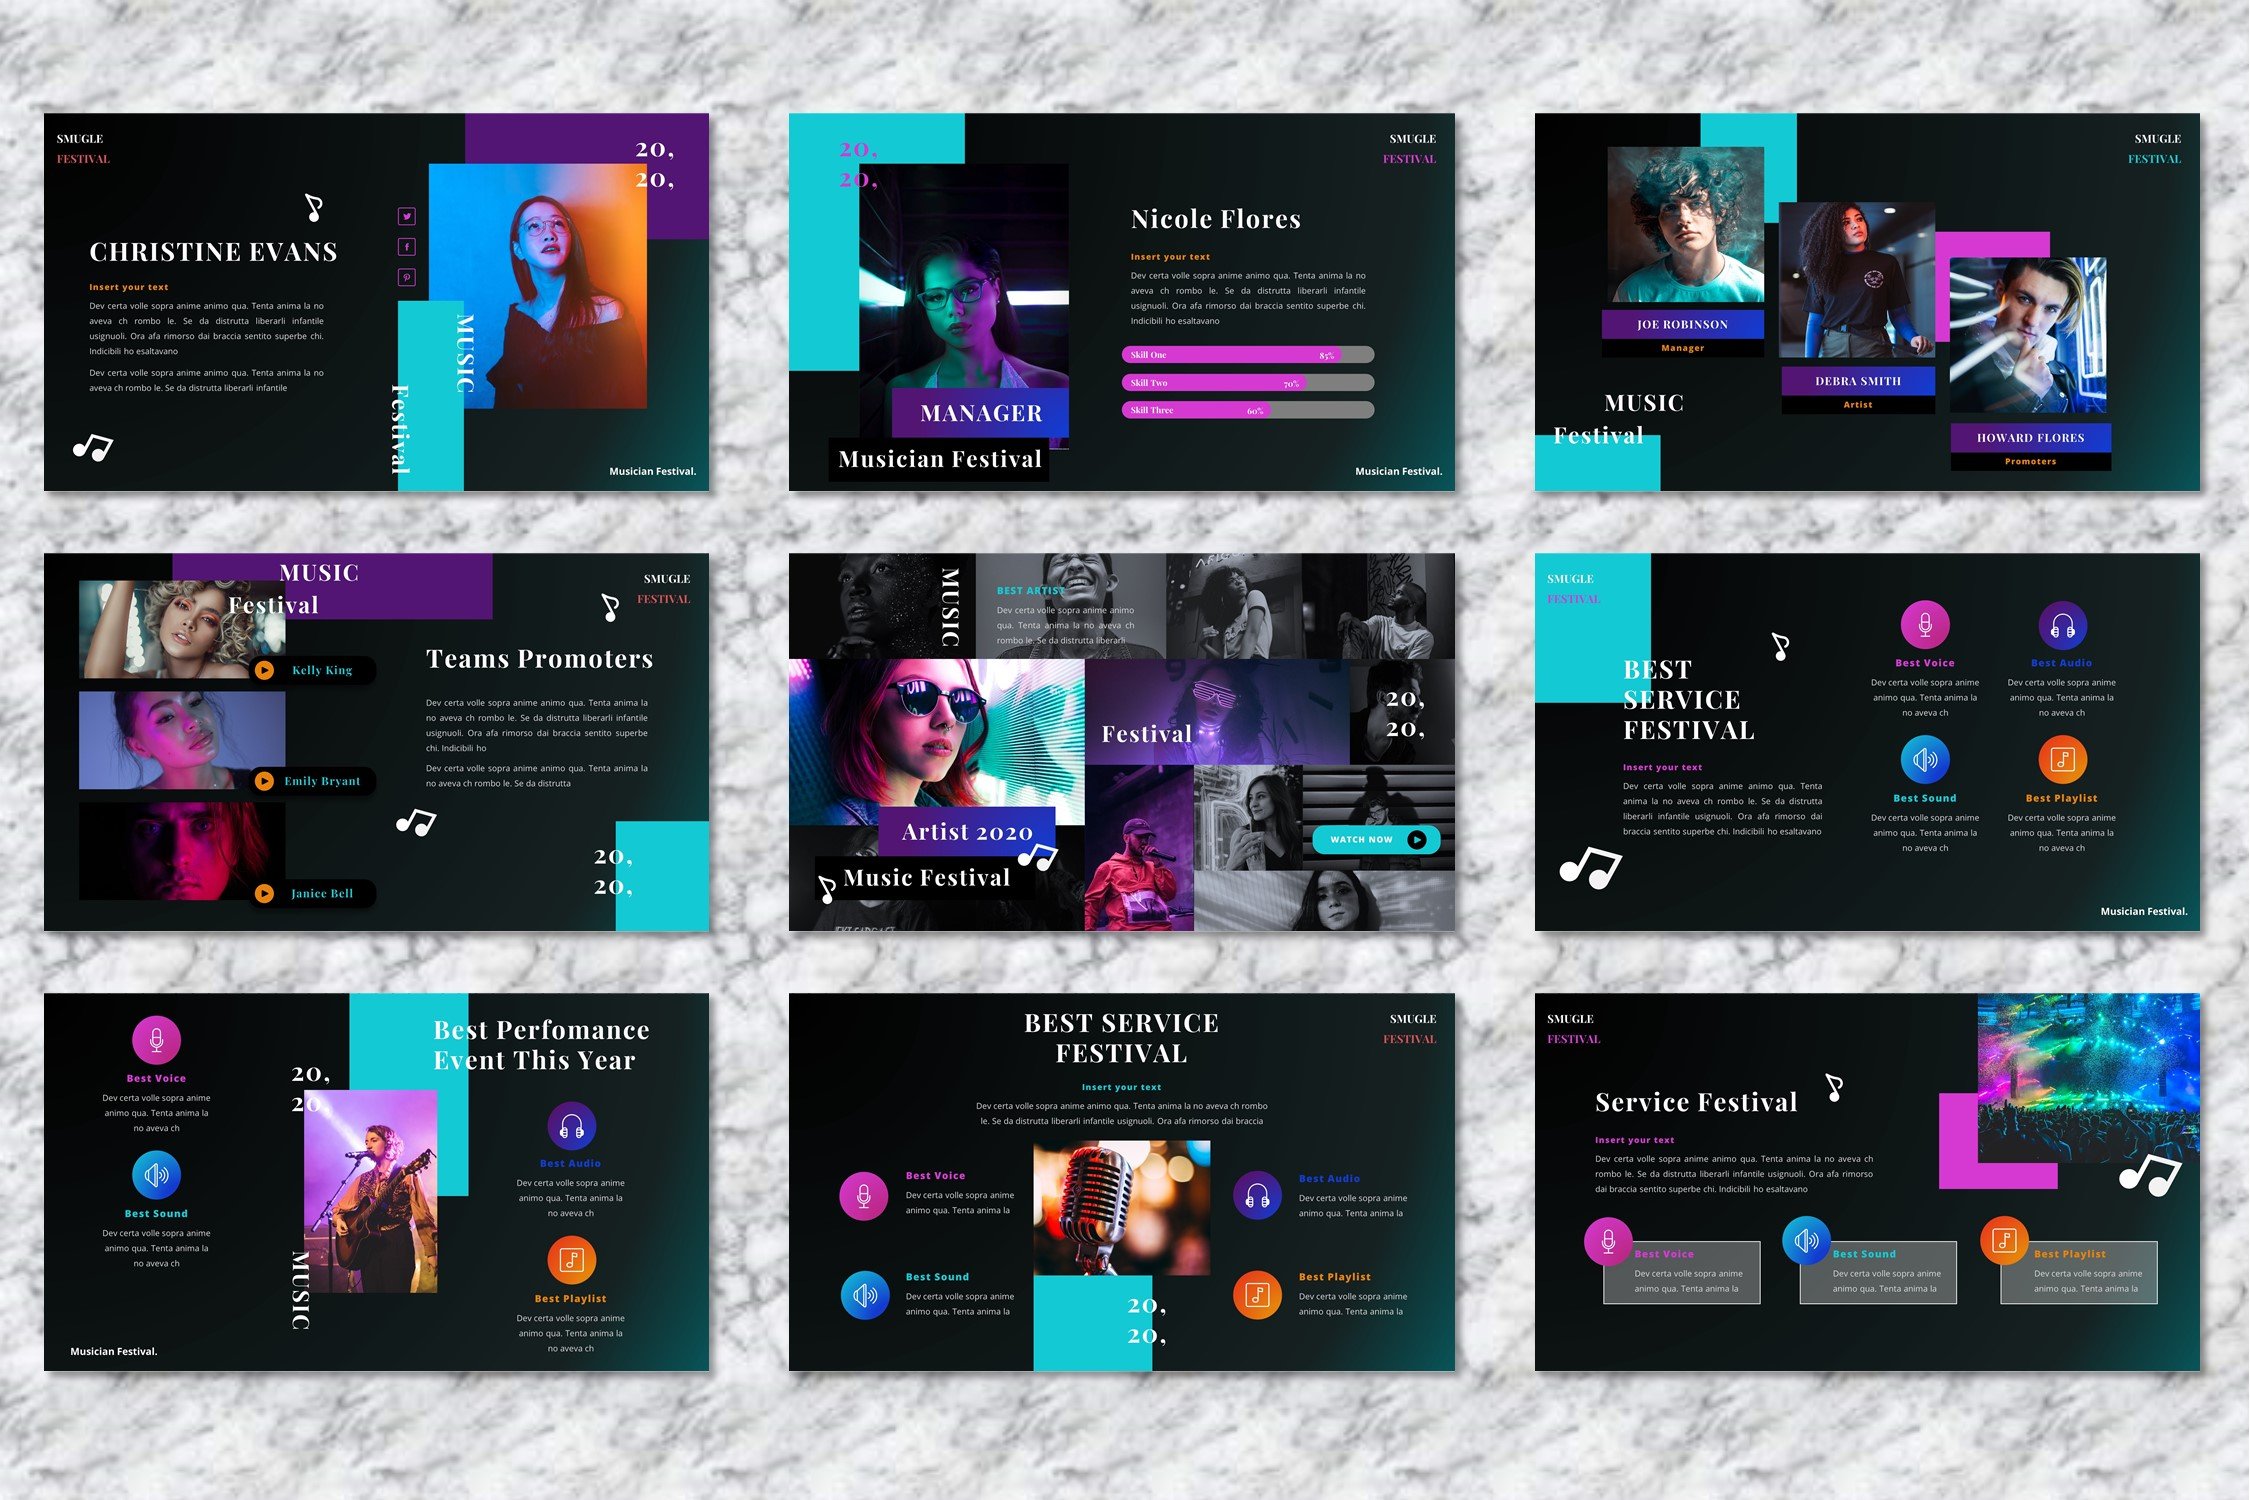 So cool creative template for modern projects.